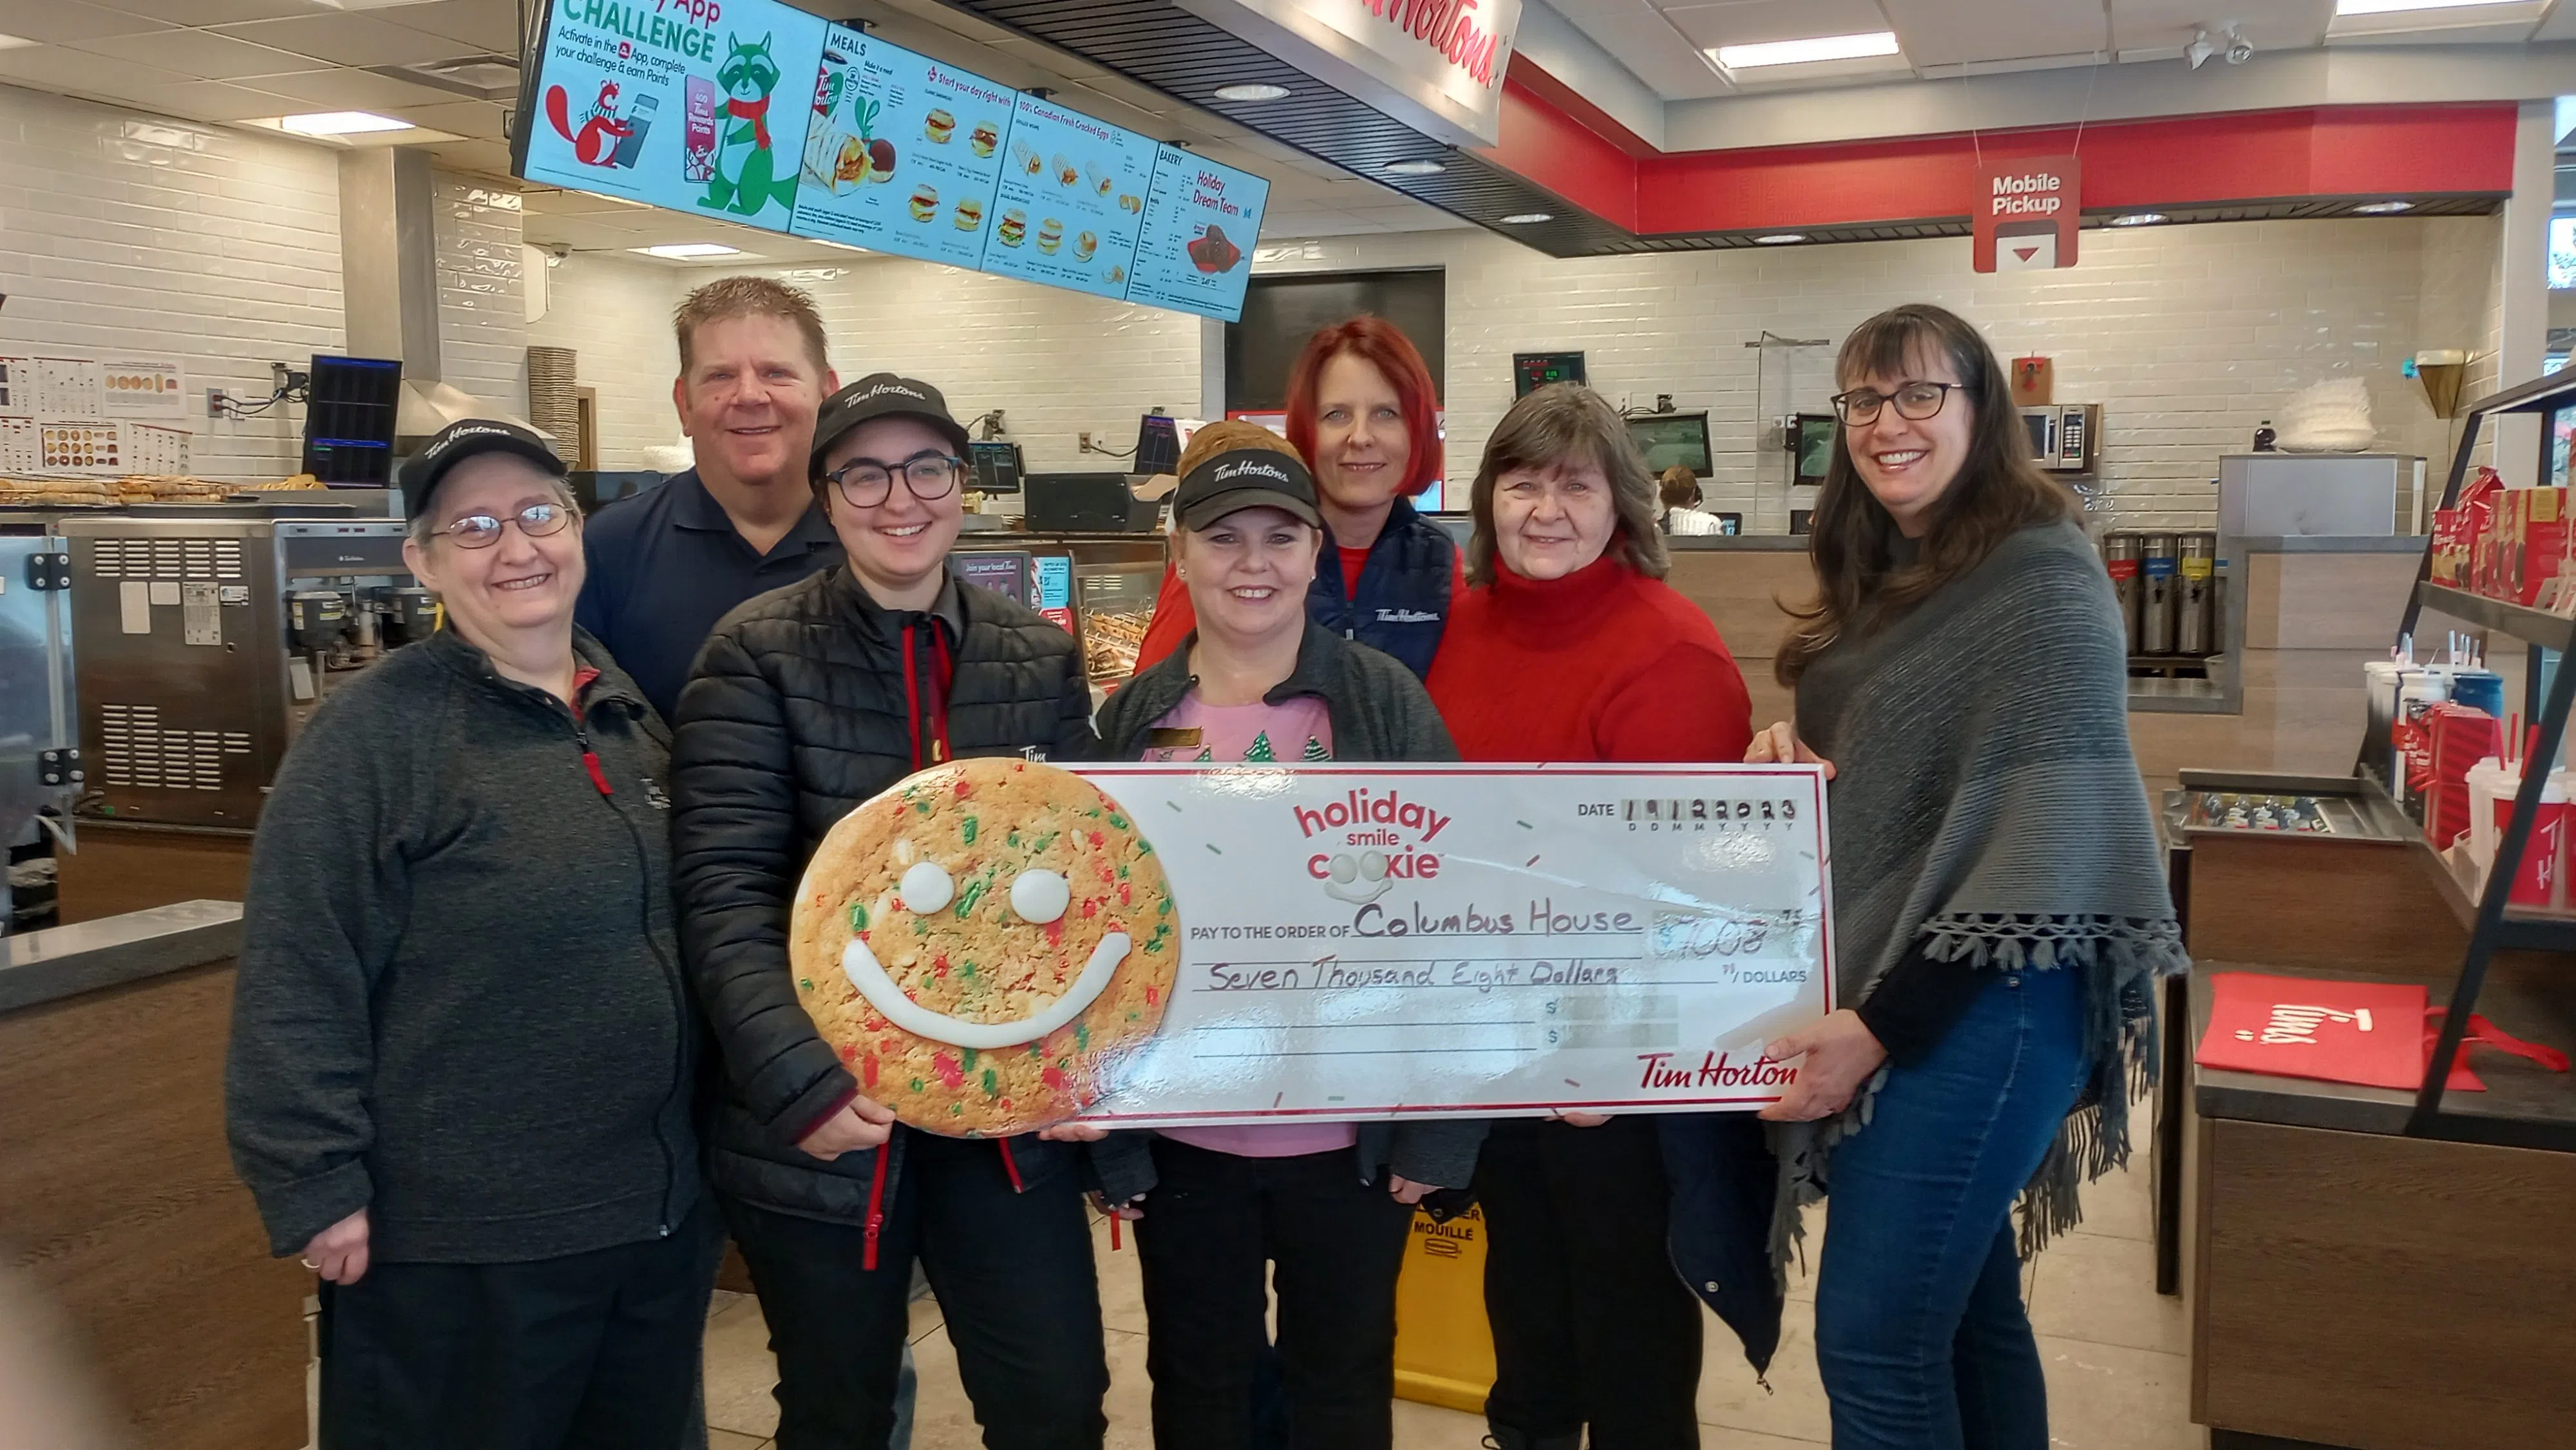 Tim Hortons' first Holiday Smile Cookie campaign to aid local